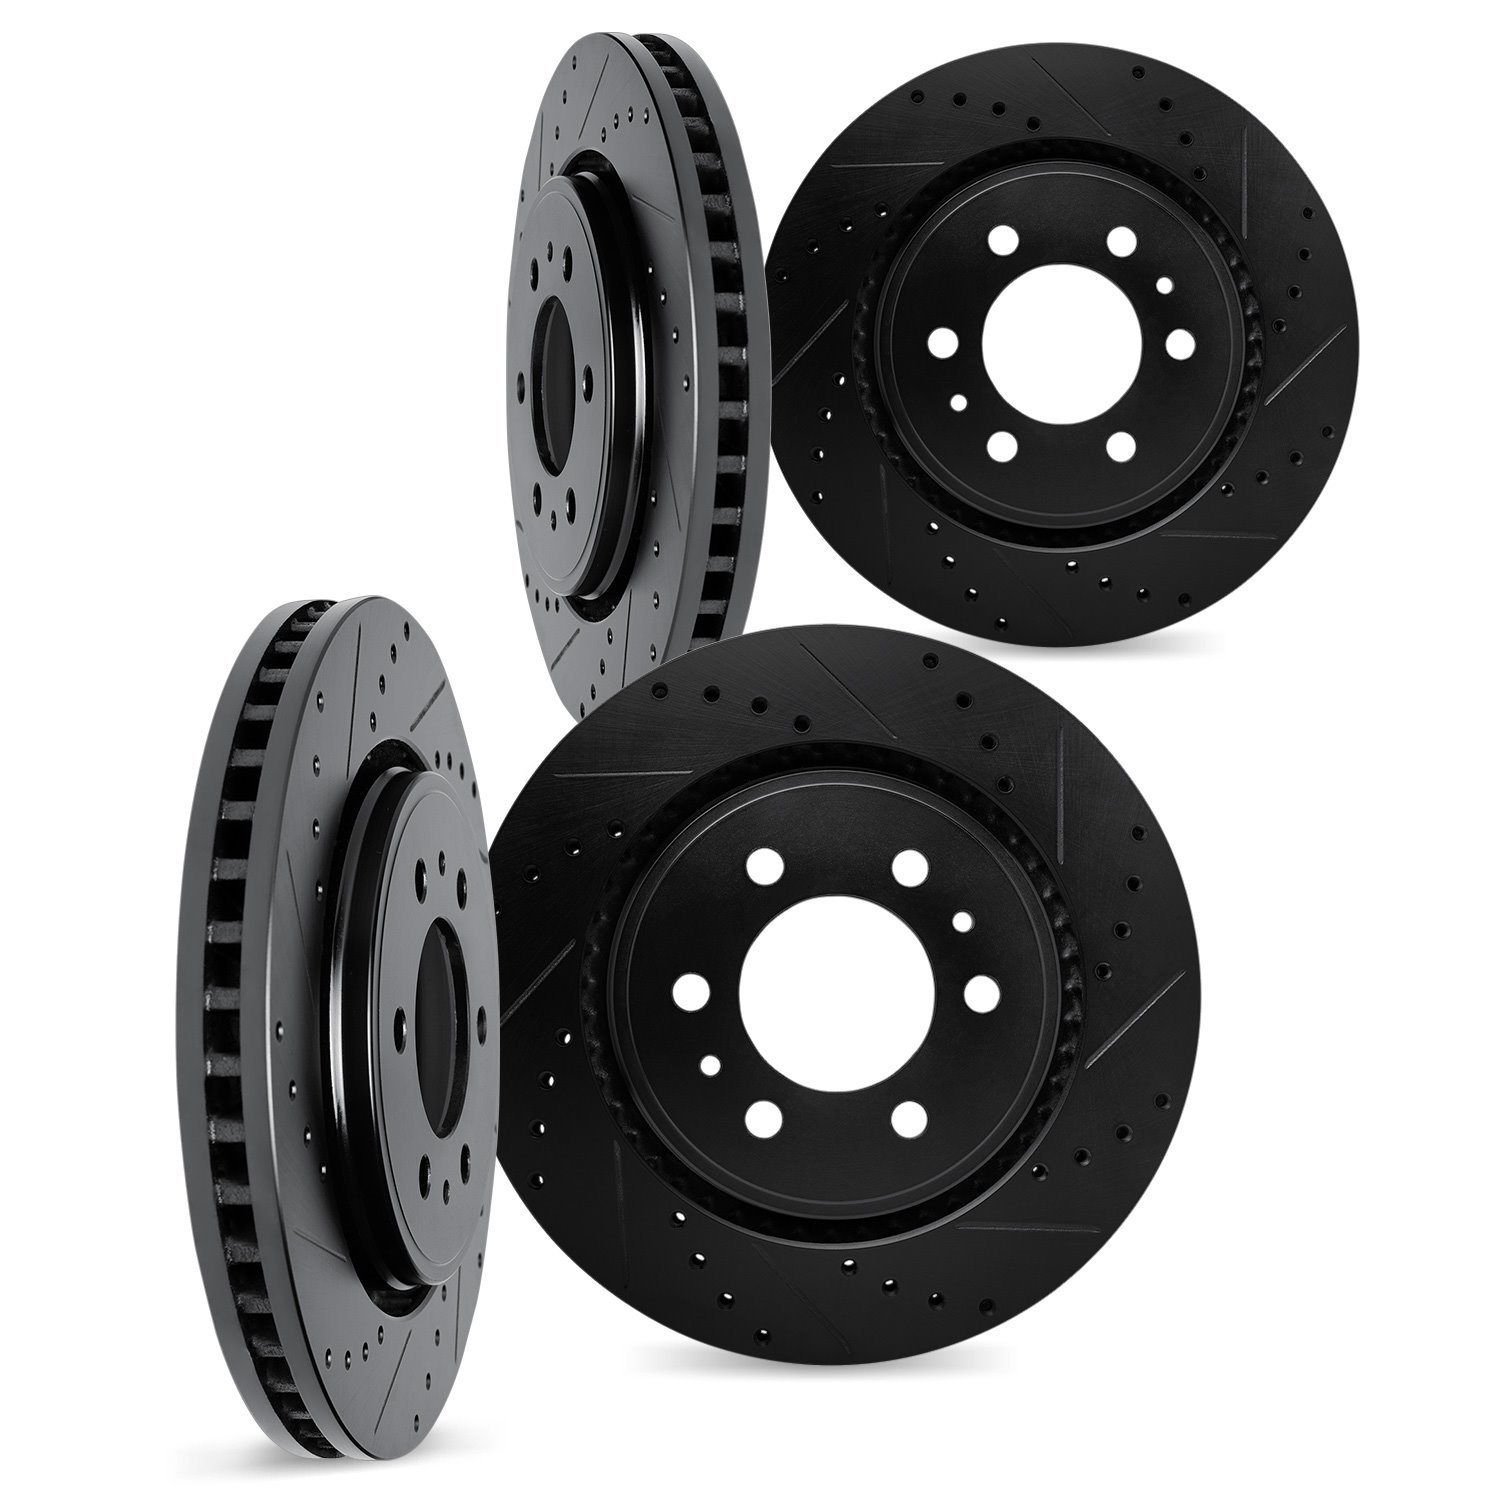 8004-37009 Drilled/Slotted Brake Rotors [Black], 2001-2004 Multiple Makes/Models, Position: Front and Rear